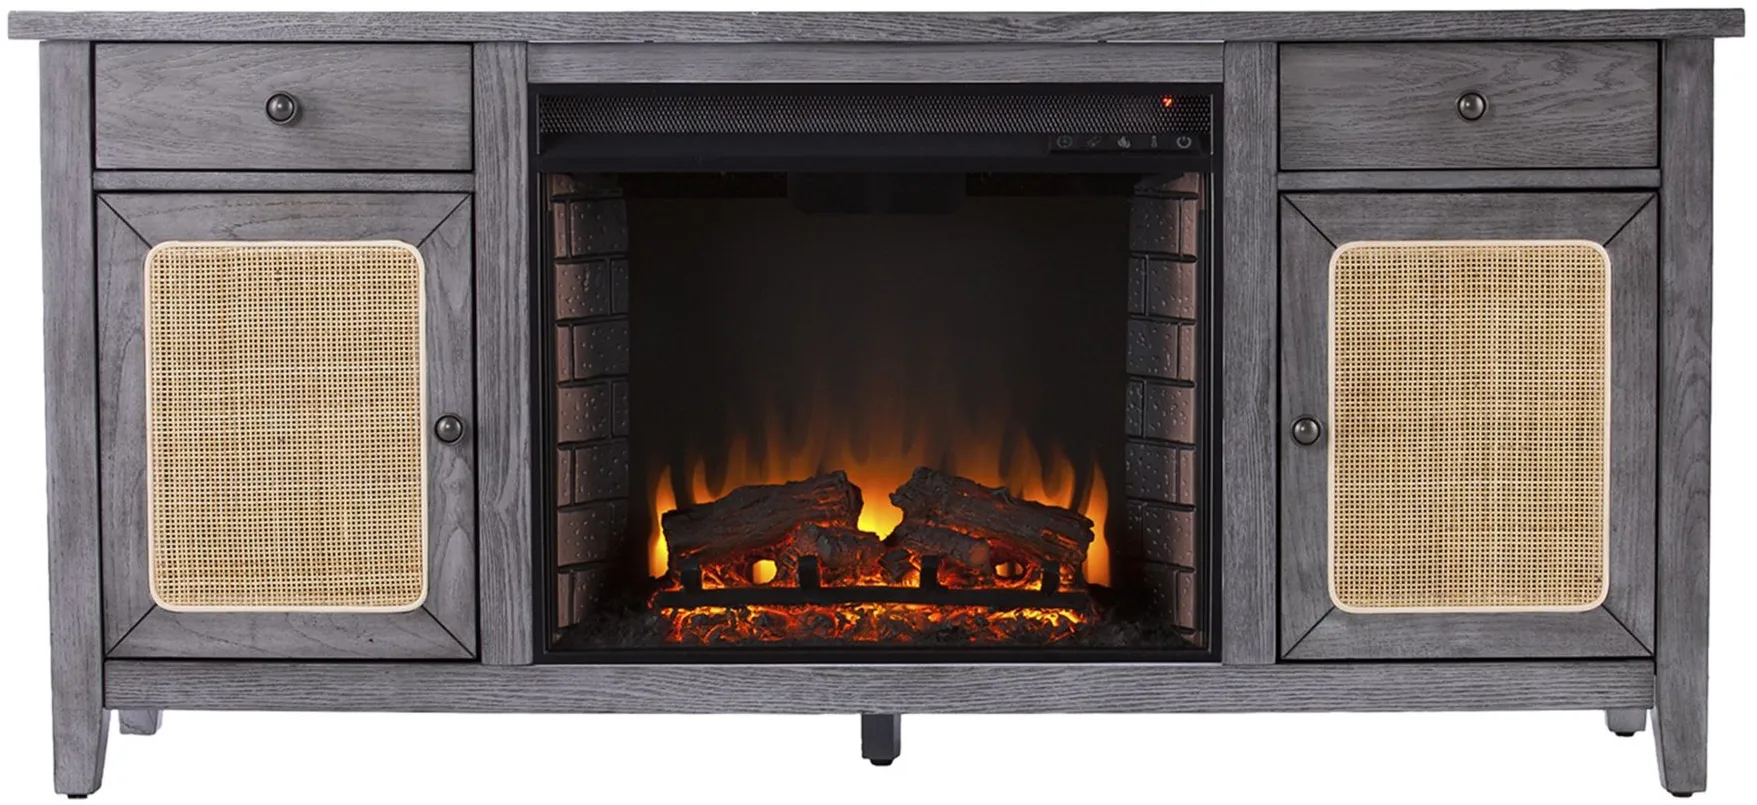 Raegan Electric Fireplace Media Console in Gray by SEI Furniture